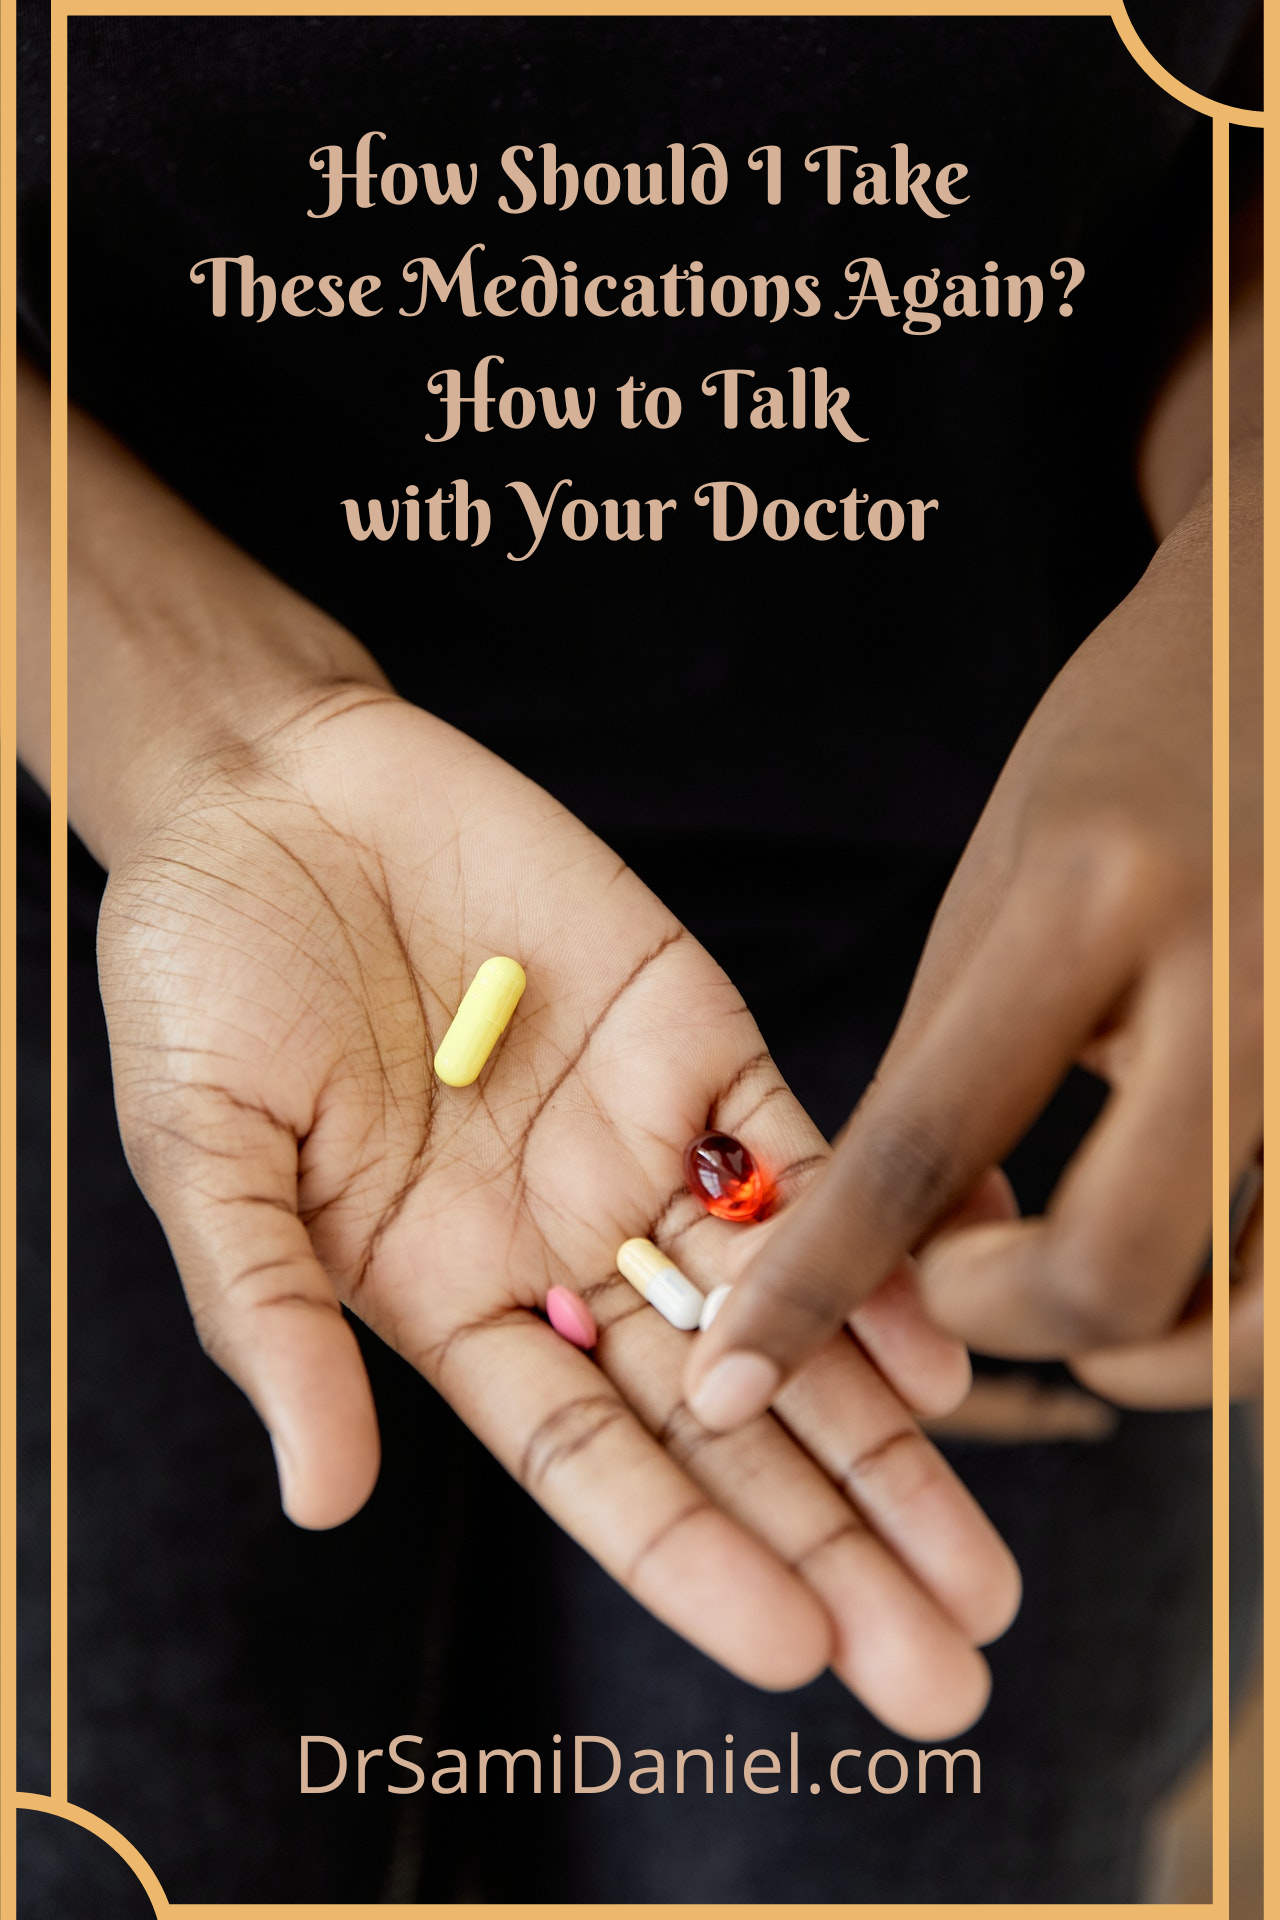 How Should I Take These Medications Again? How to Talk with Your Doctor